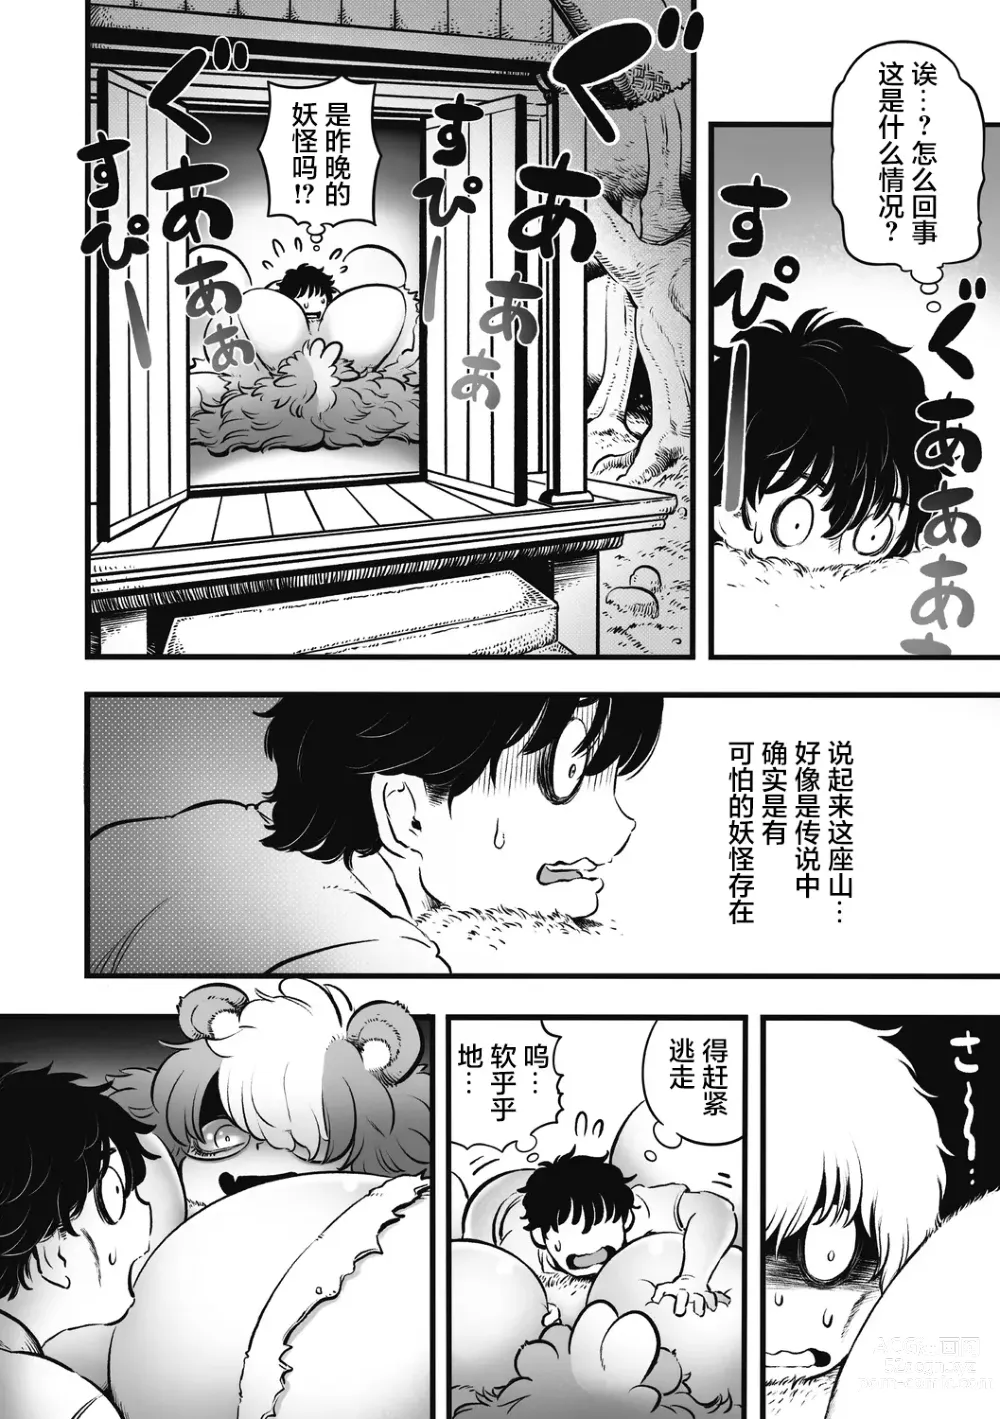 Page 5 of doujinshi 刑部河田ひより（肉包汉化组）（Chinese）